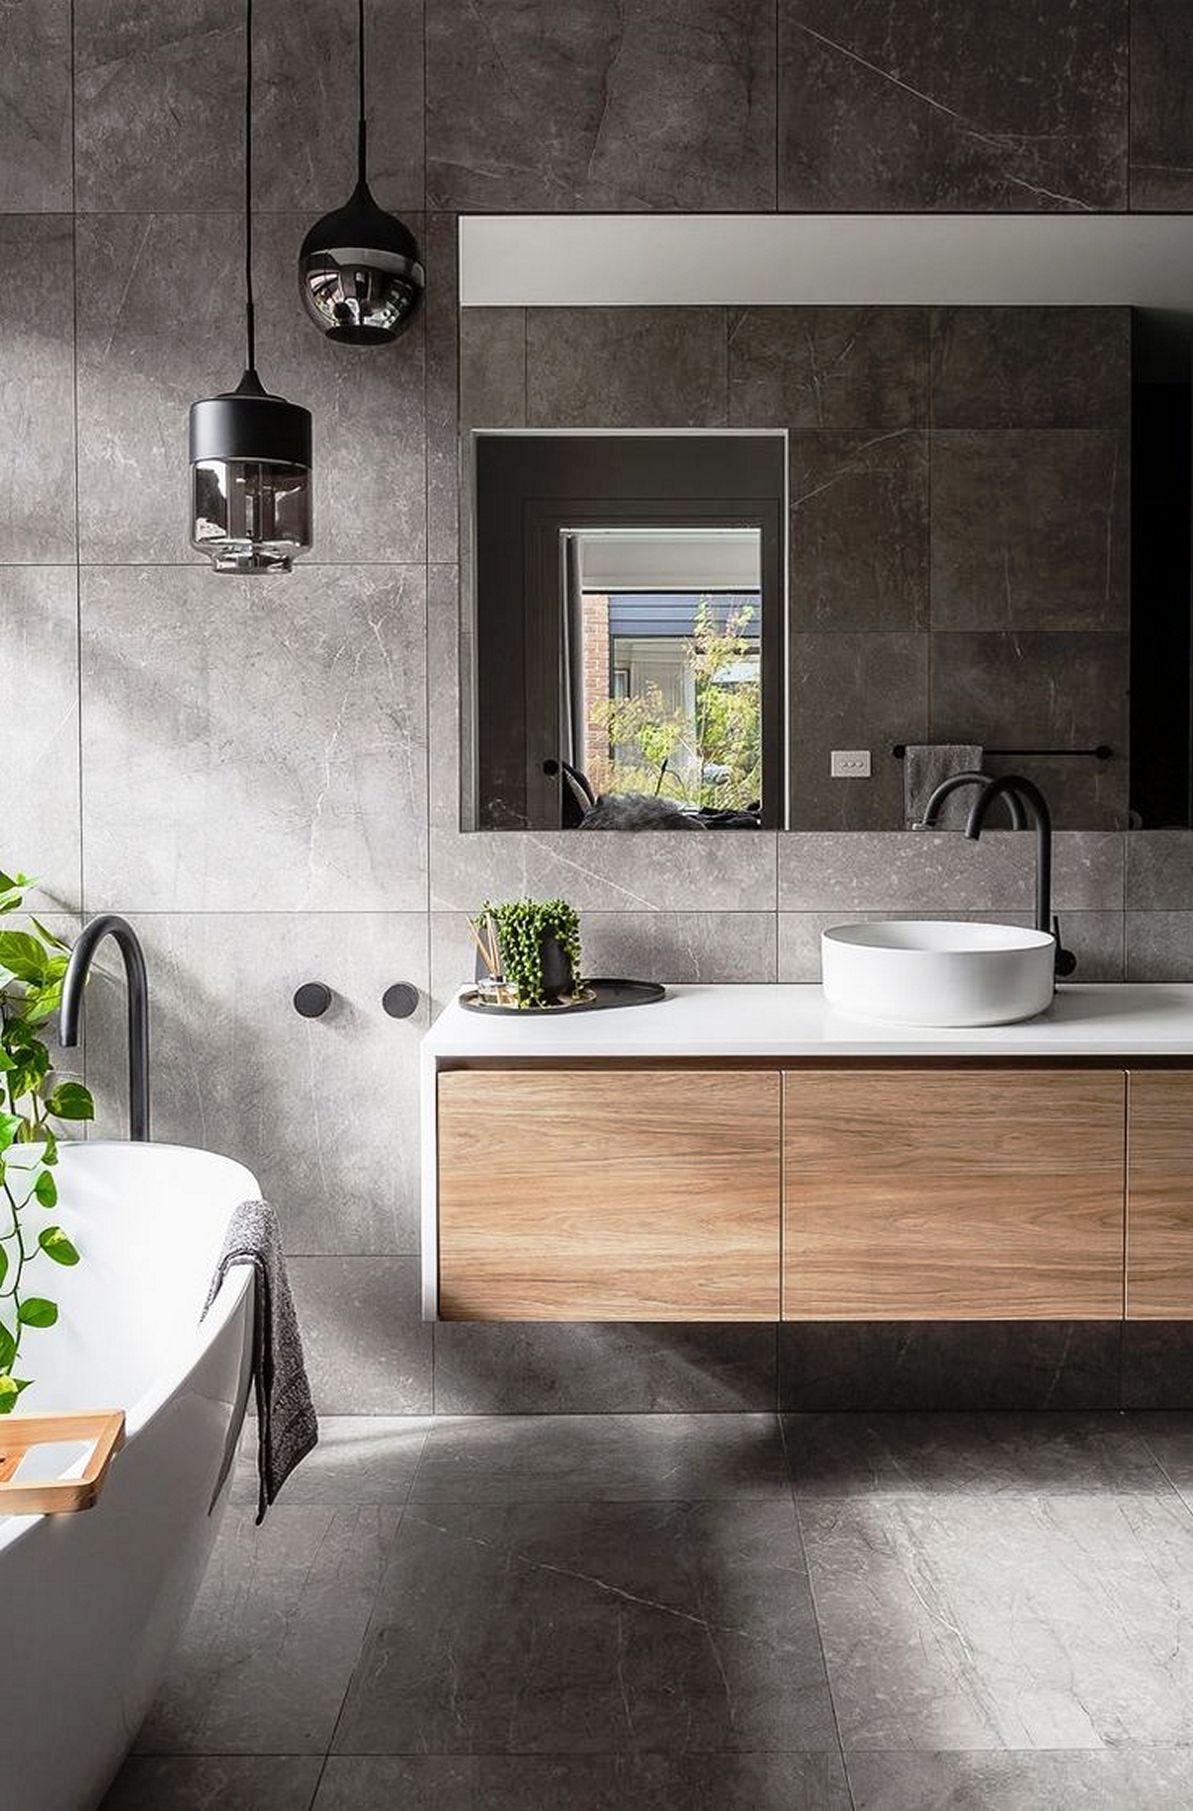 Bathroom trends 2021 the perfect new look for your bathroom remodeling 21